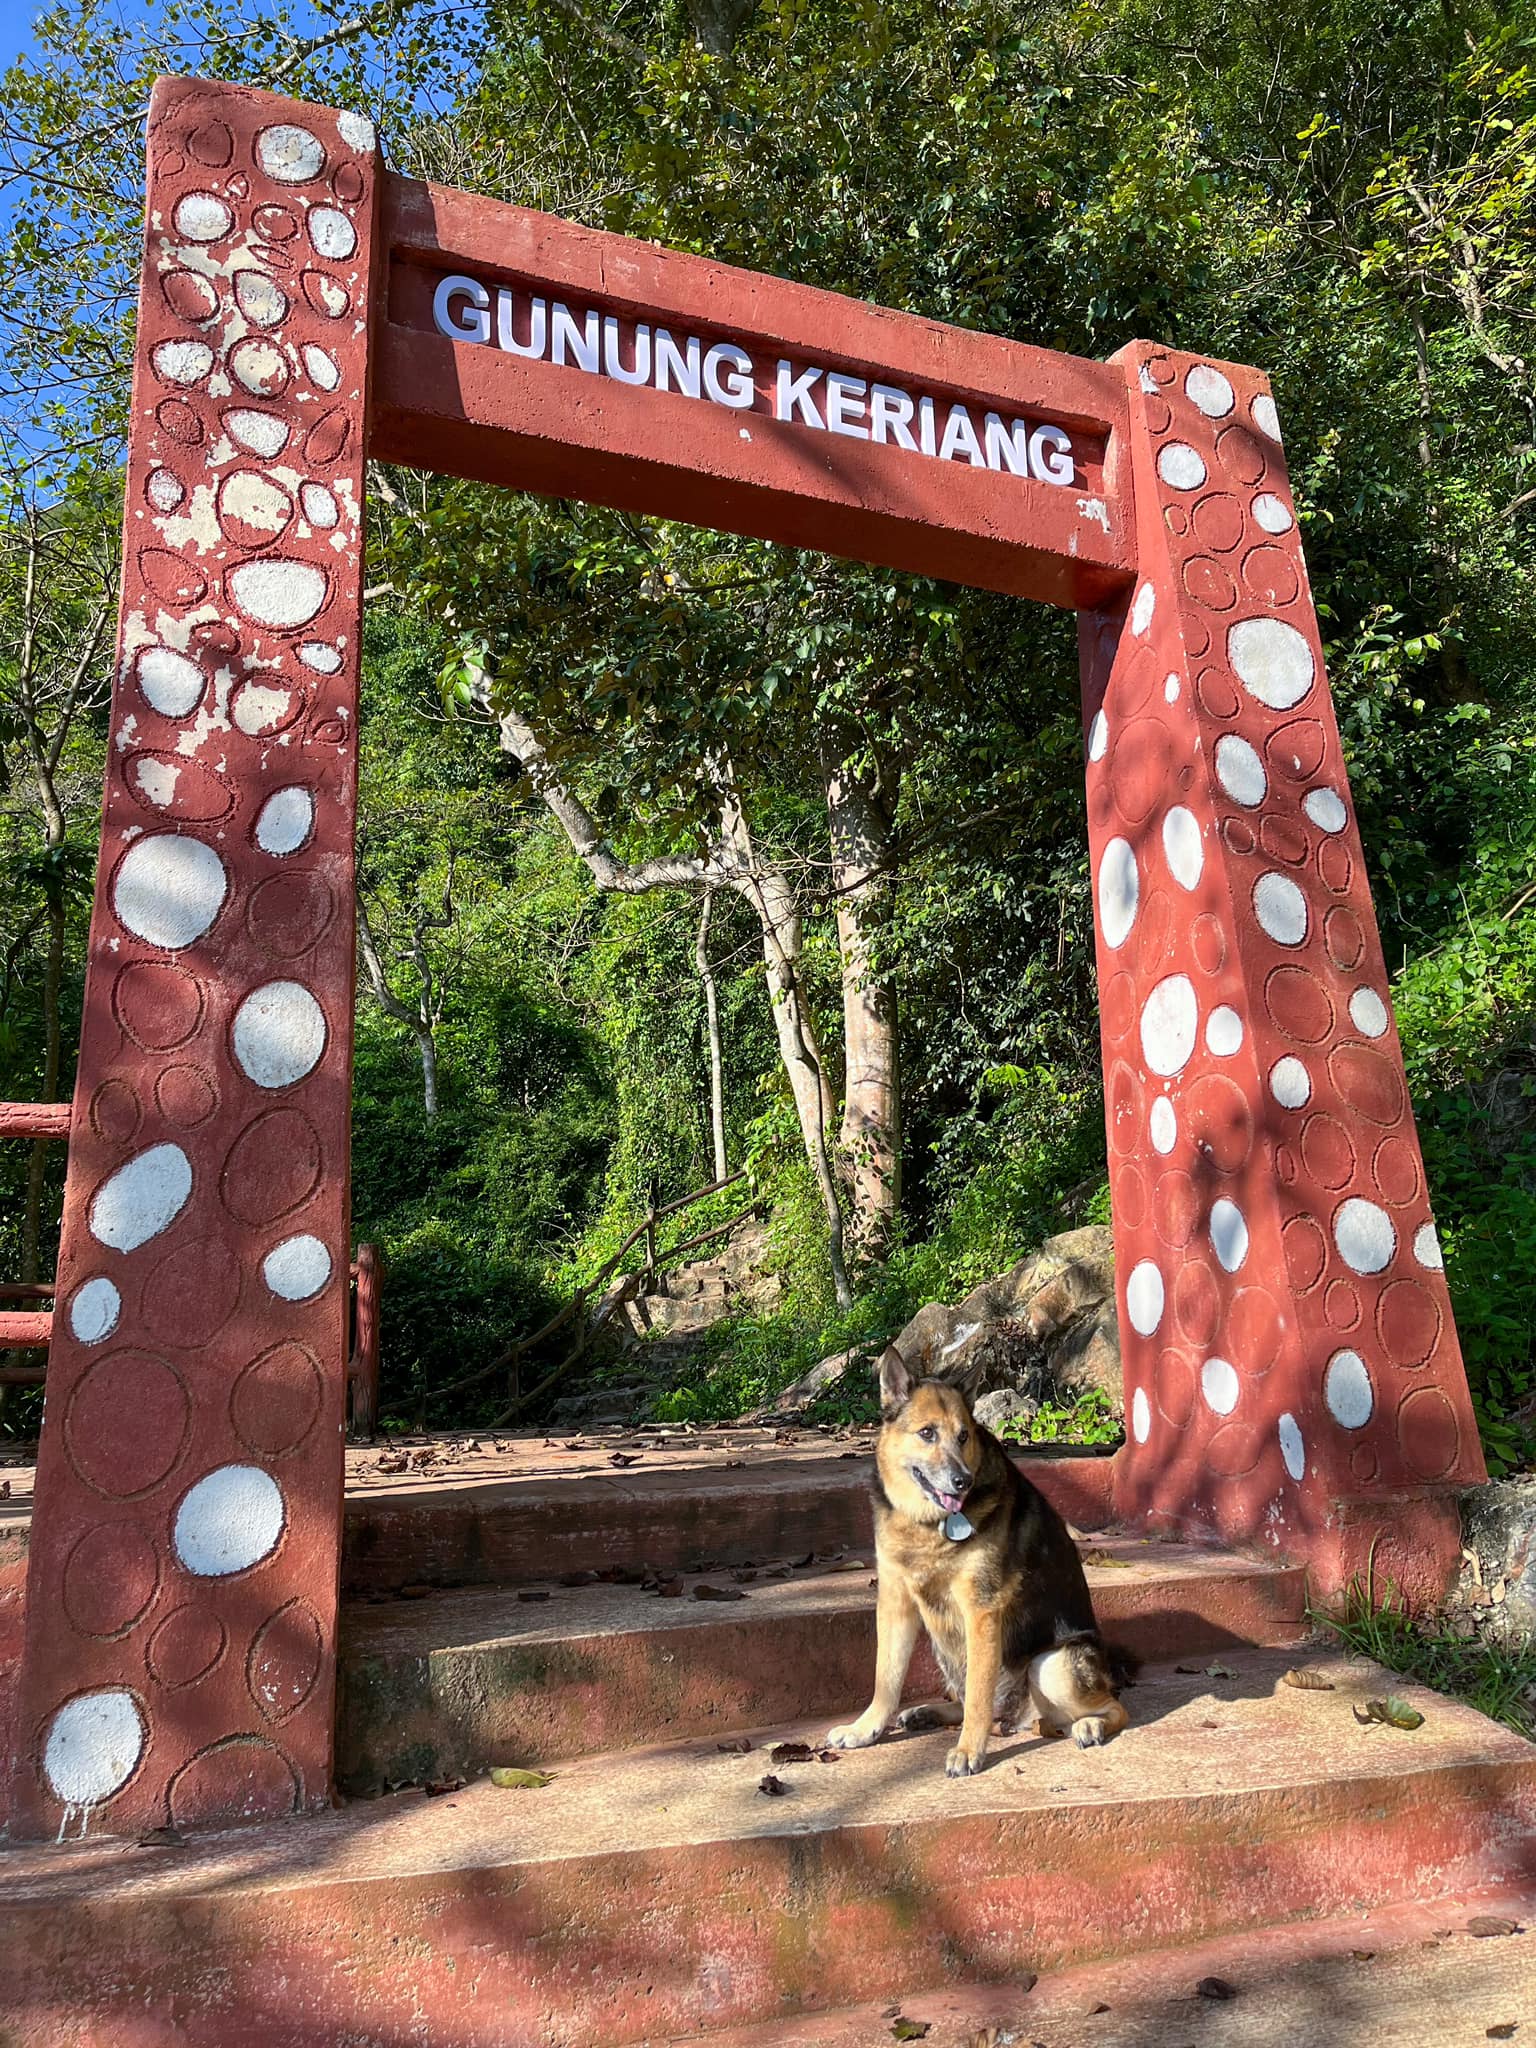 Gunung keriang with her dog bobby